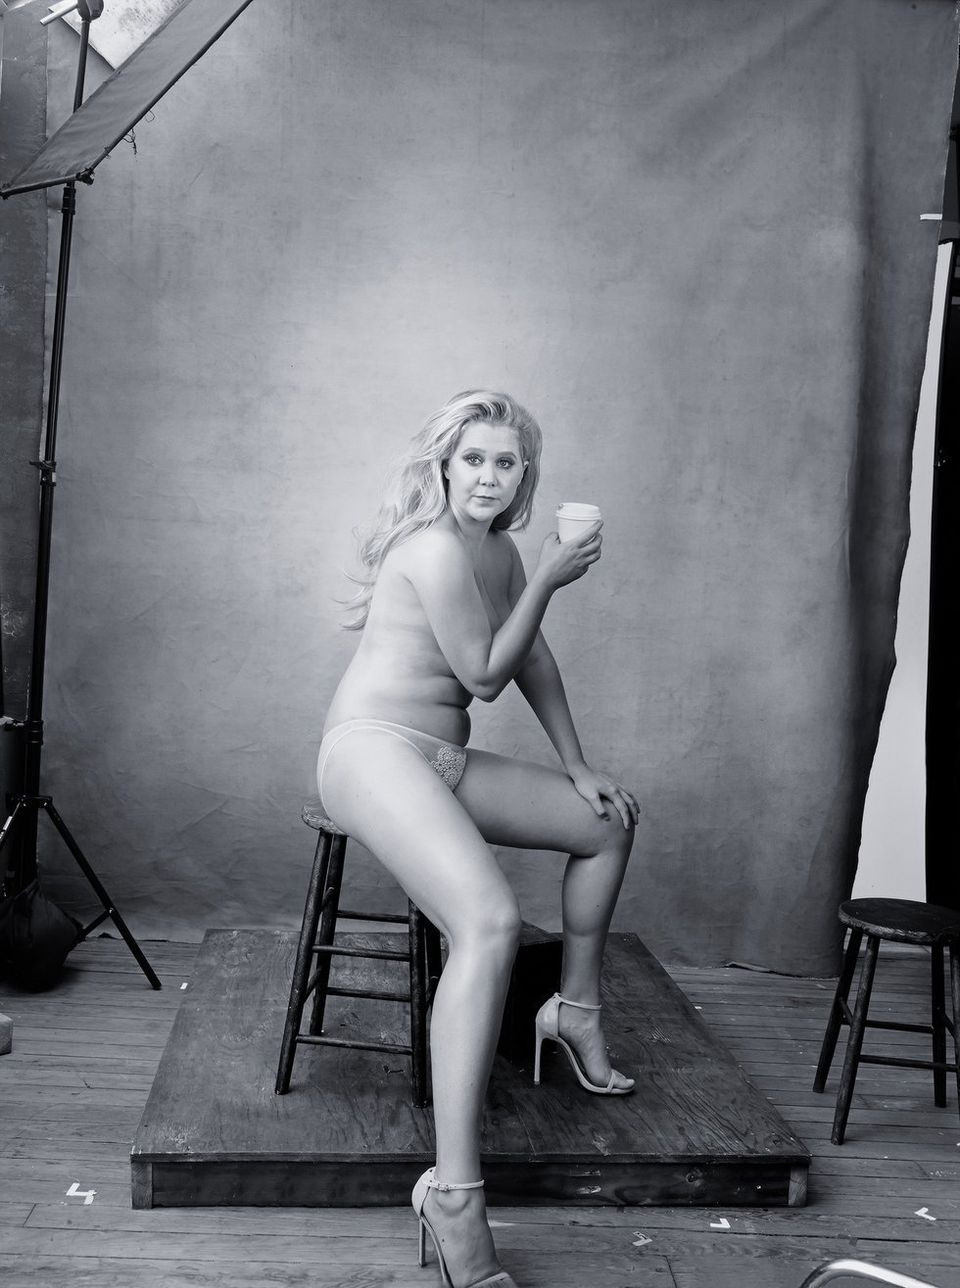 Amy Schumer for the month of December